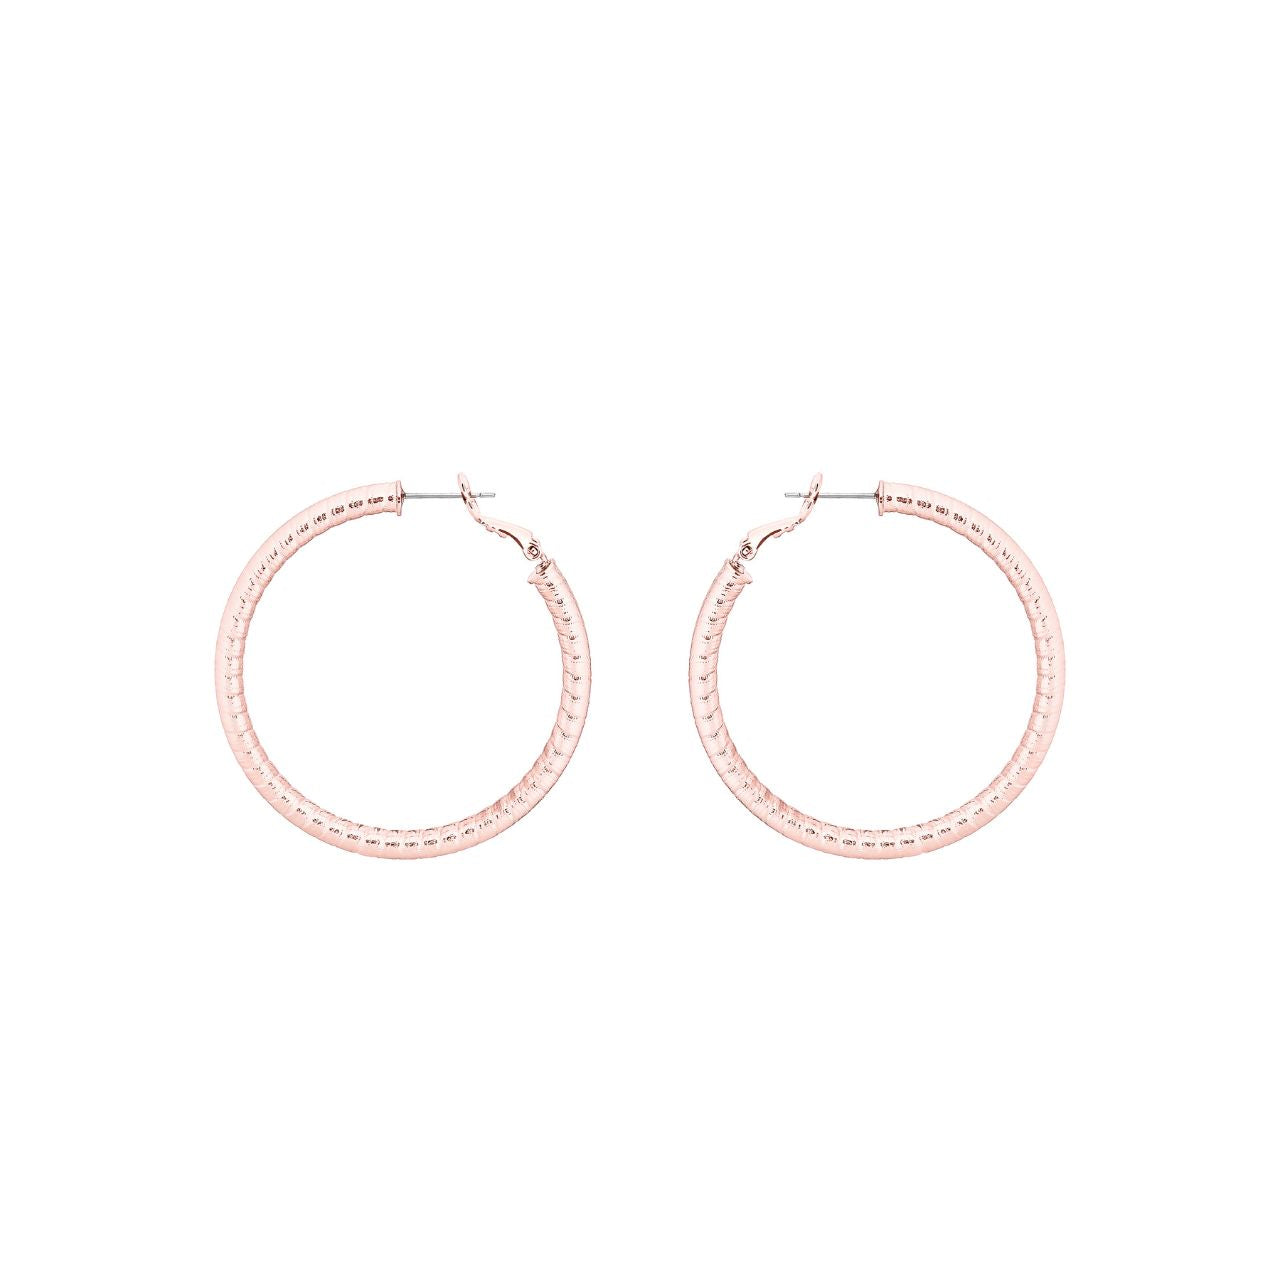 Hoop Silk Thread Rose Gold Earrings by Tipperary  Add some elegance to your jewelry collection with Tipperary's Hoop Silk Thread Rose Gold Earrings. The luxurious design is crafted with precise detail, and the soft silk threads give an effortless look. Enjoy the perfect touch of glamour with these timeless earrings.